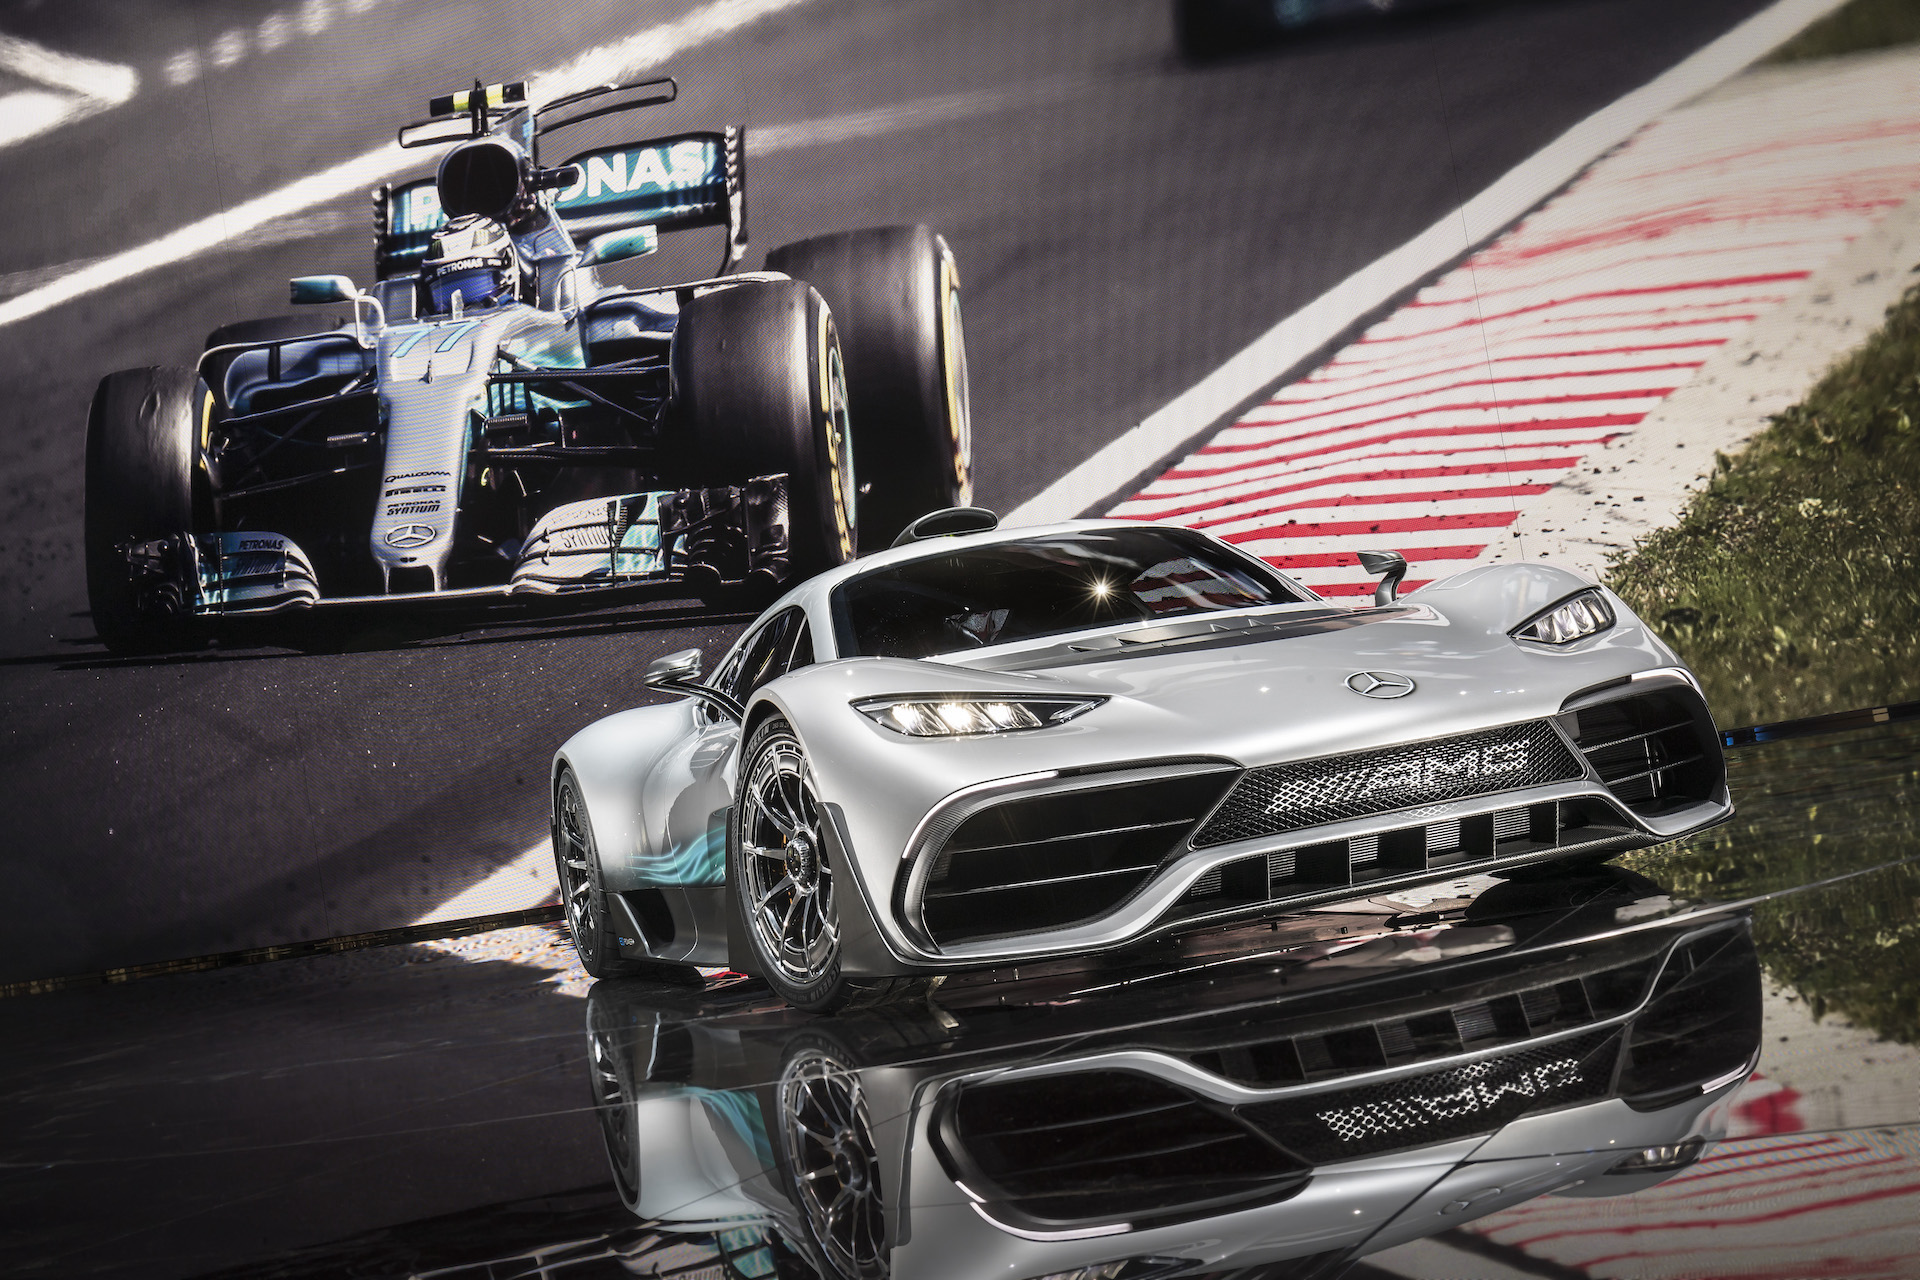 An image of a Mercedes-AMG One on a stage with an image of an F1 car behind it.